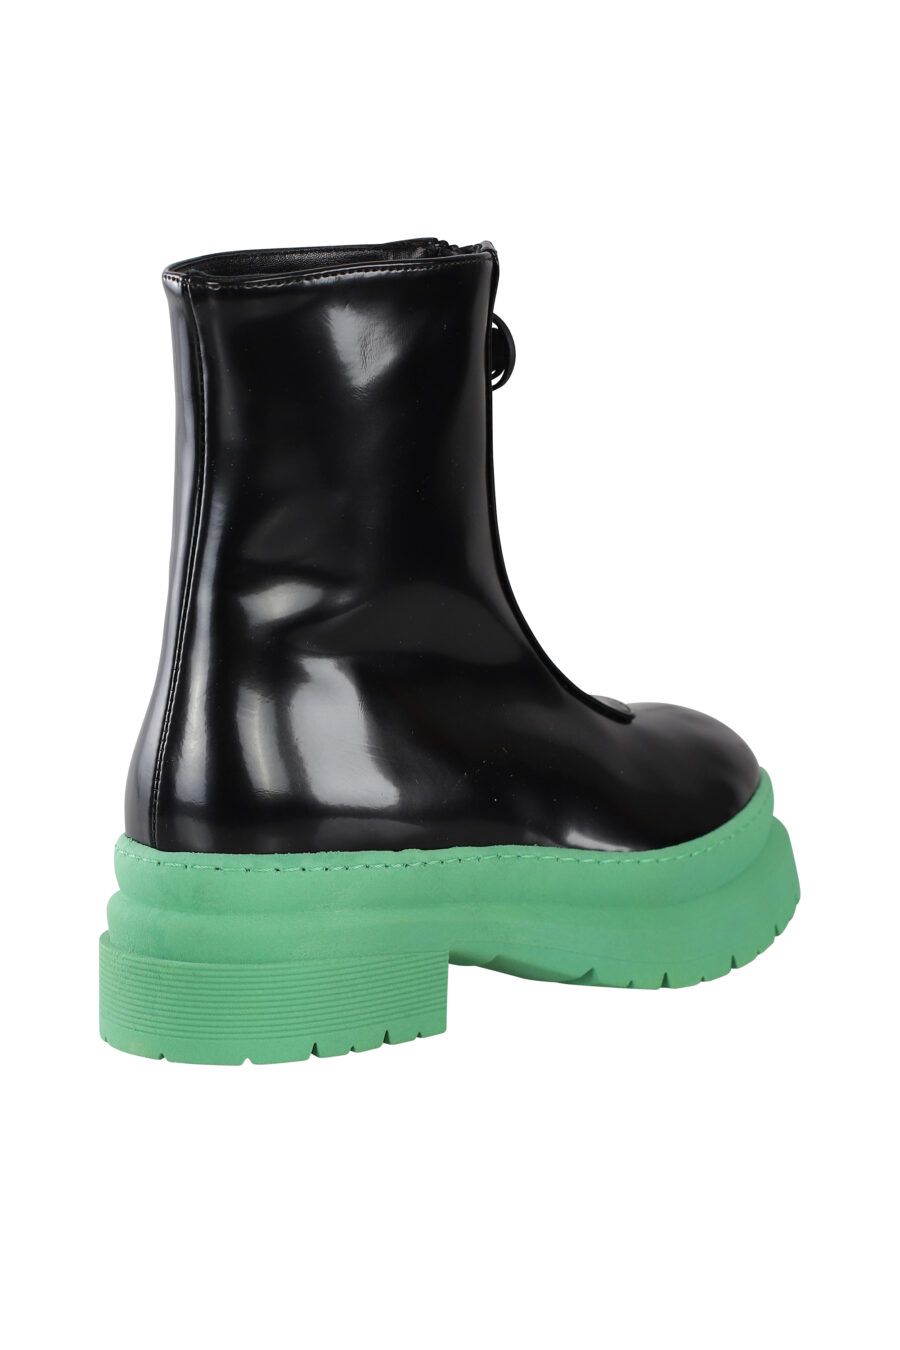 Black vegan leather ankle boots with green sole - IMG 6872